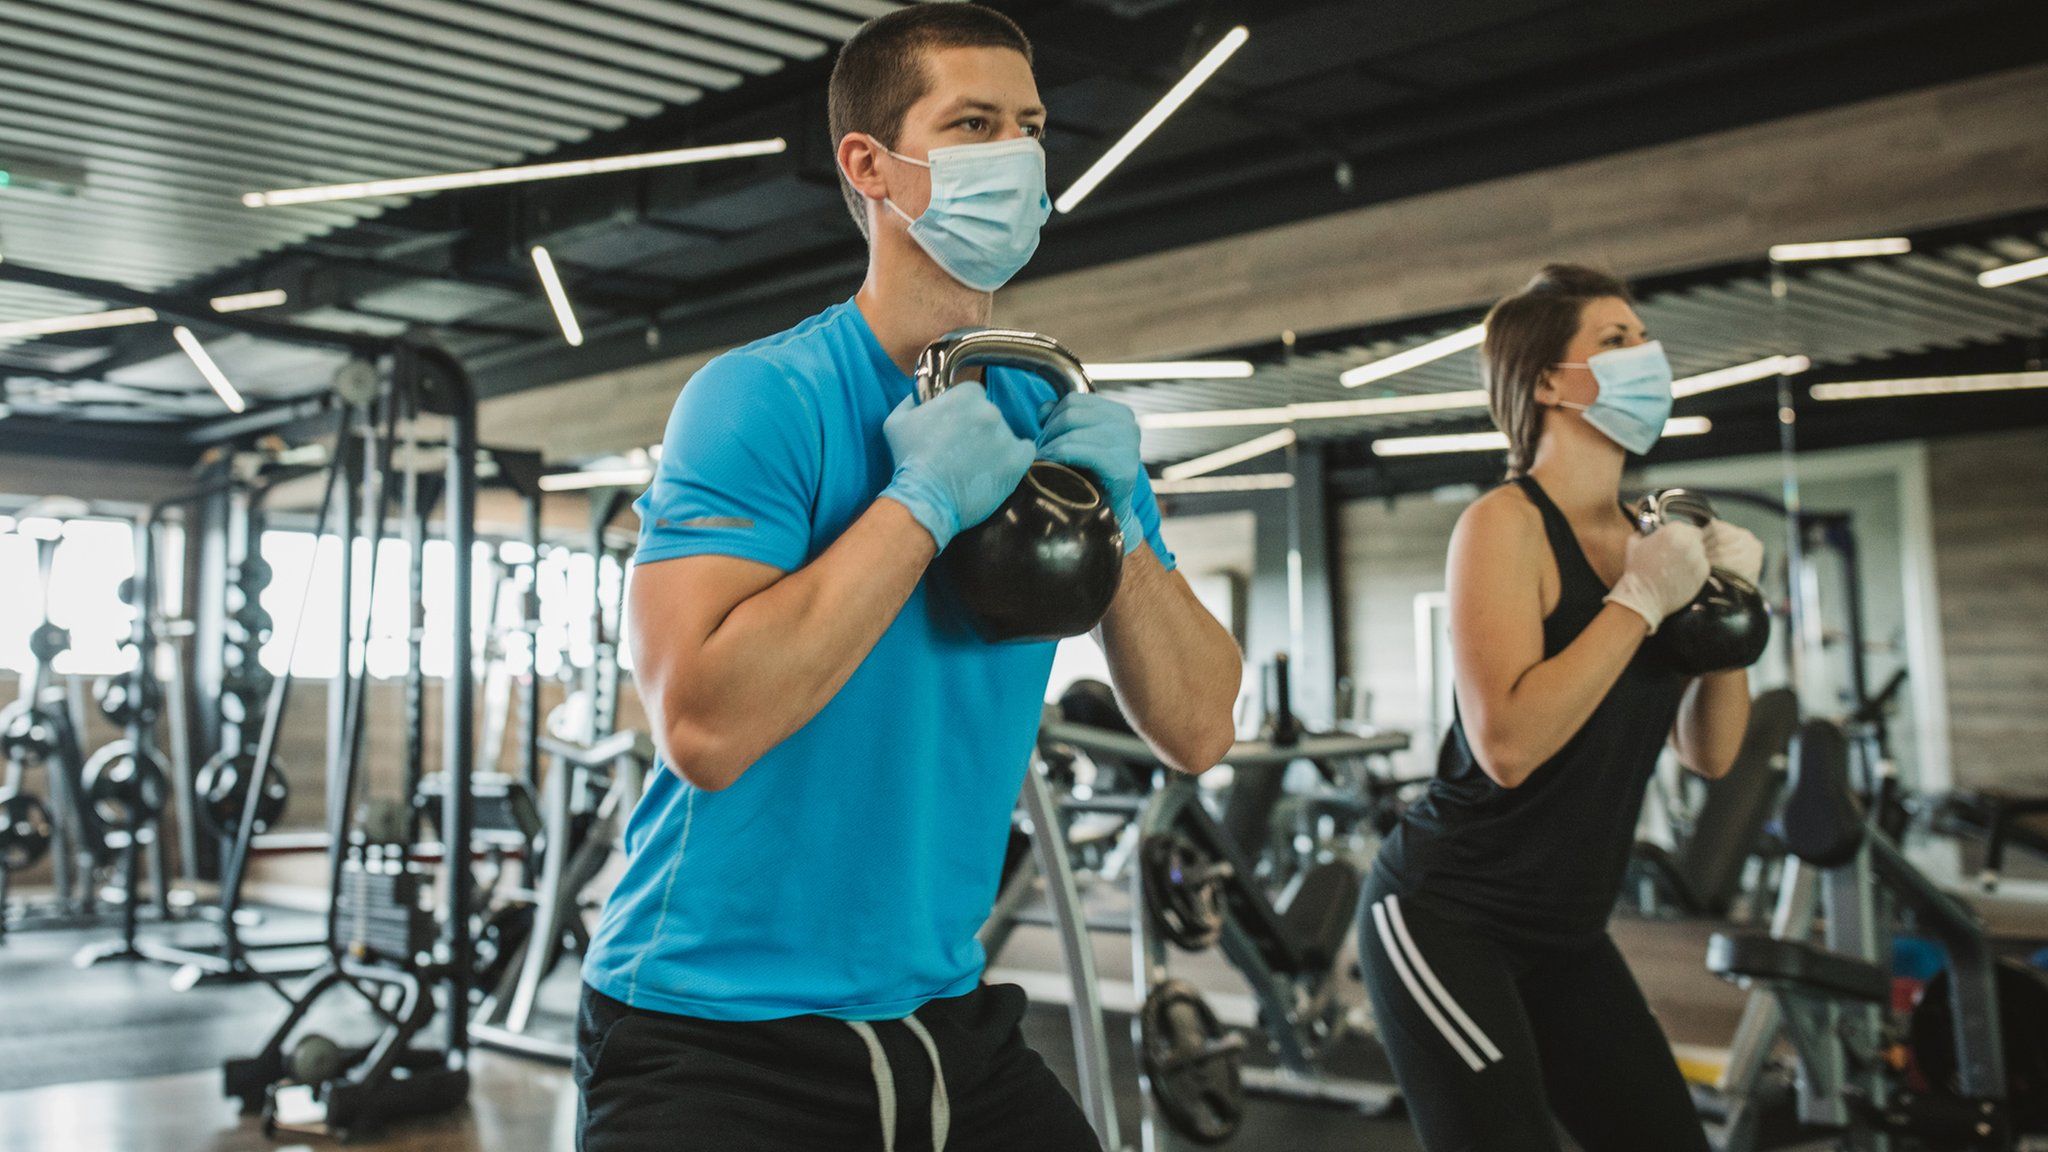 Man and woman wearing masks working out at a gym